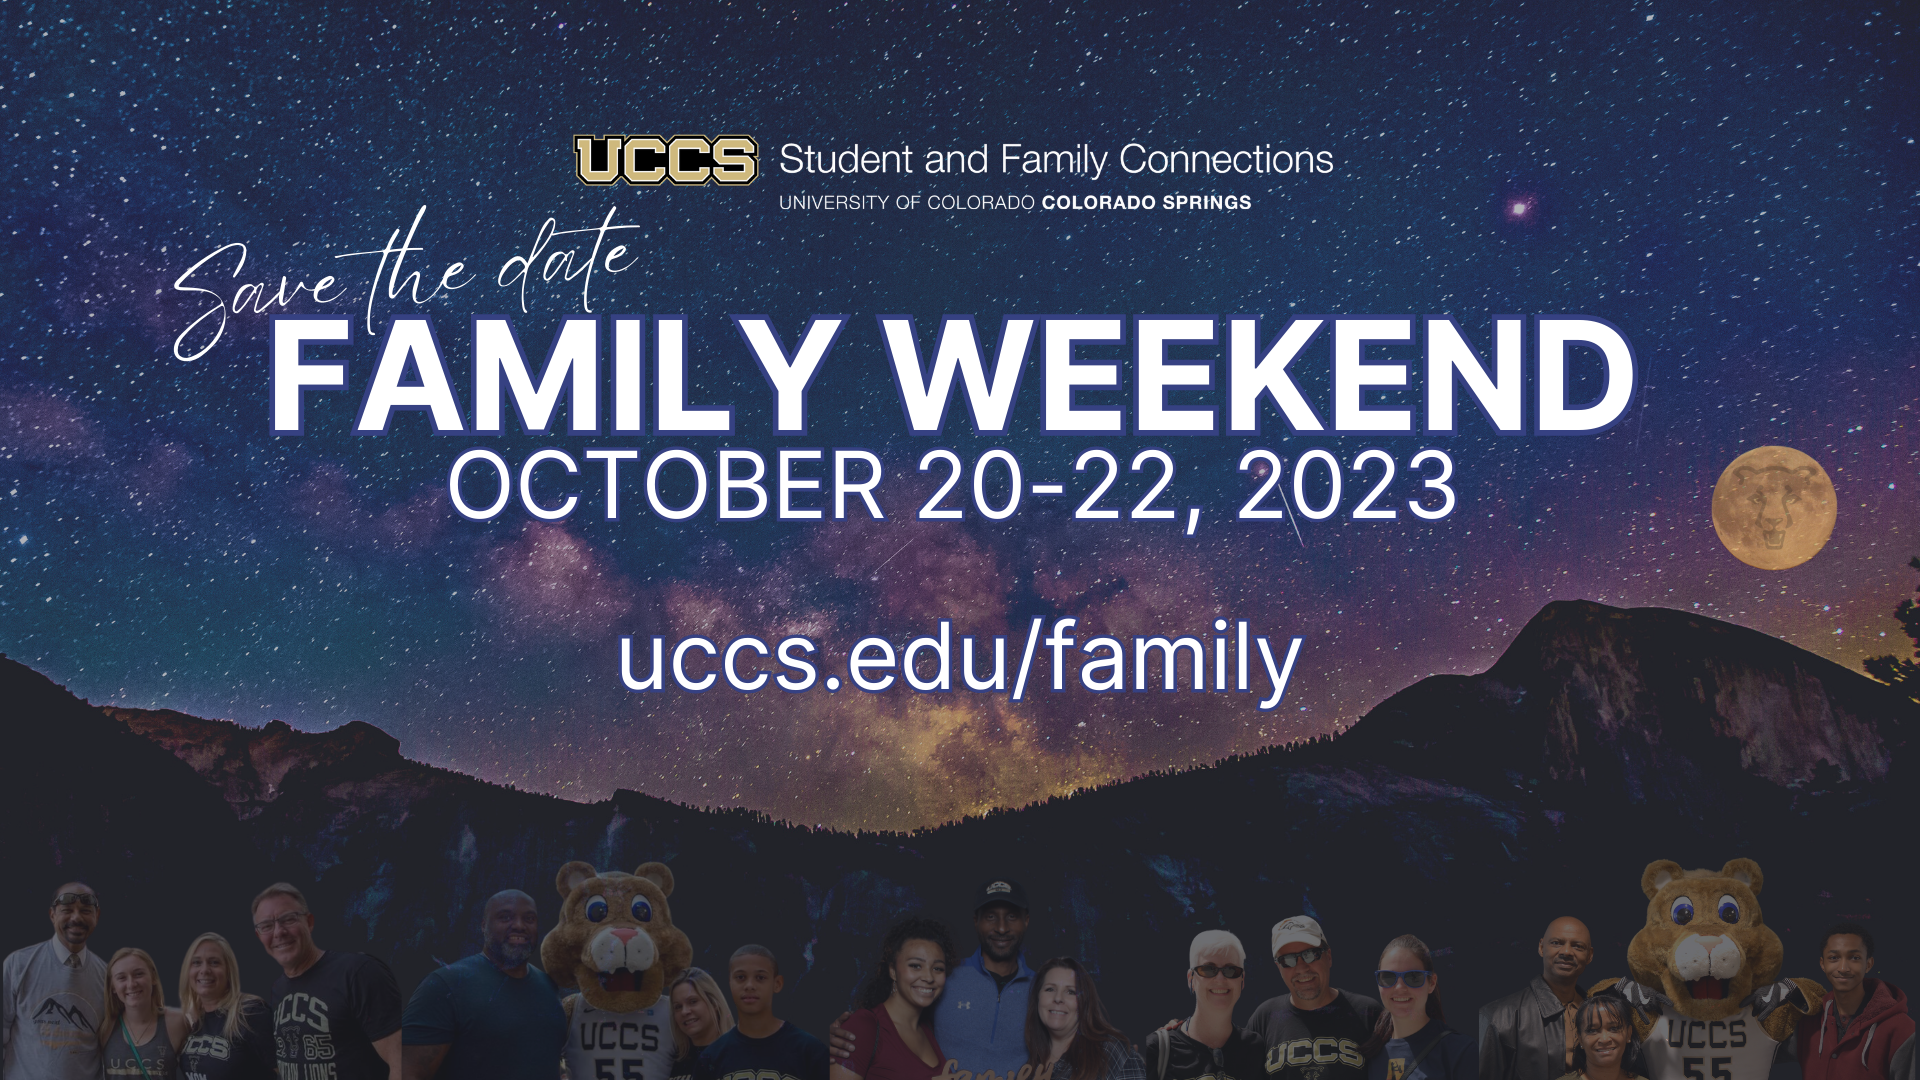 An image of the milky way above the mountains with images of UCCS students and their families. Text includes: UCCS Student and Family Connections. Save the date! Family Weekend 2023. October 20-22, 2023. uccs.edu/family